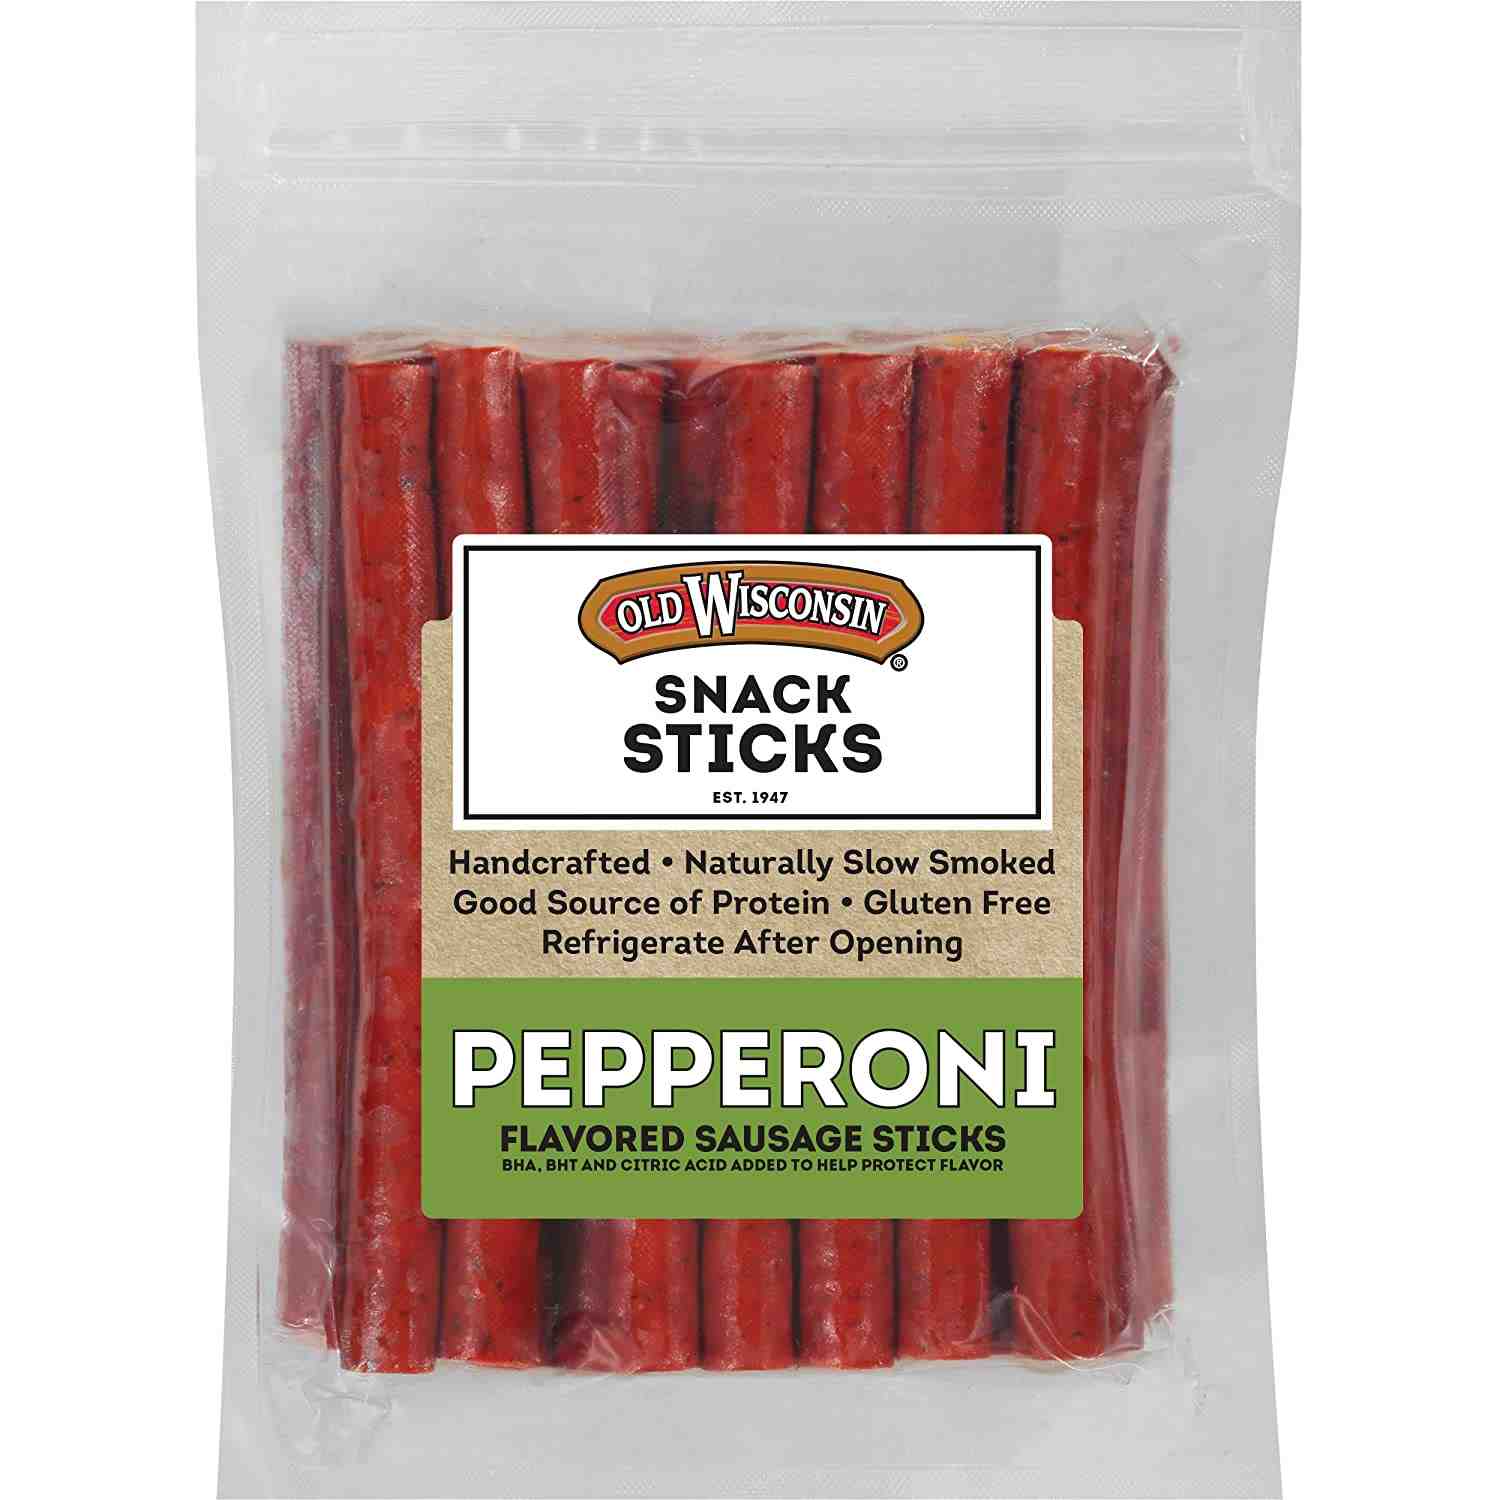 What do Italians use instead of pepperoni?